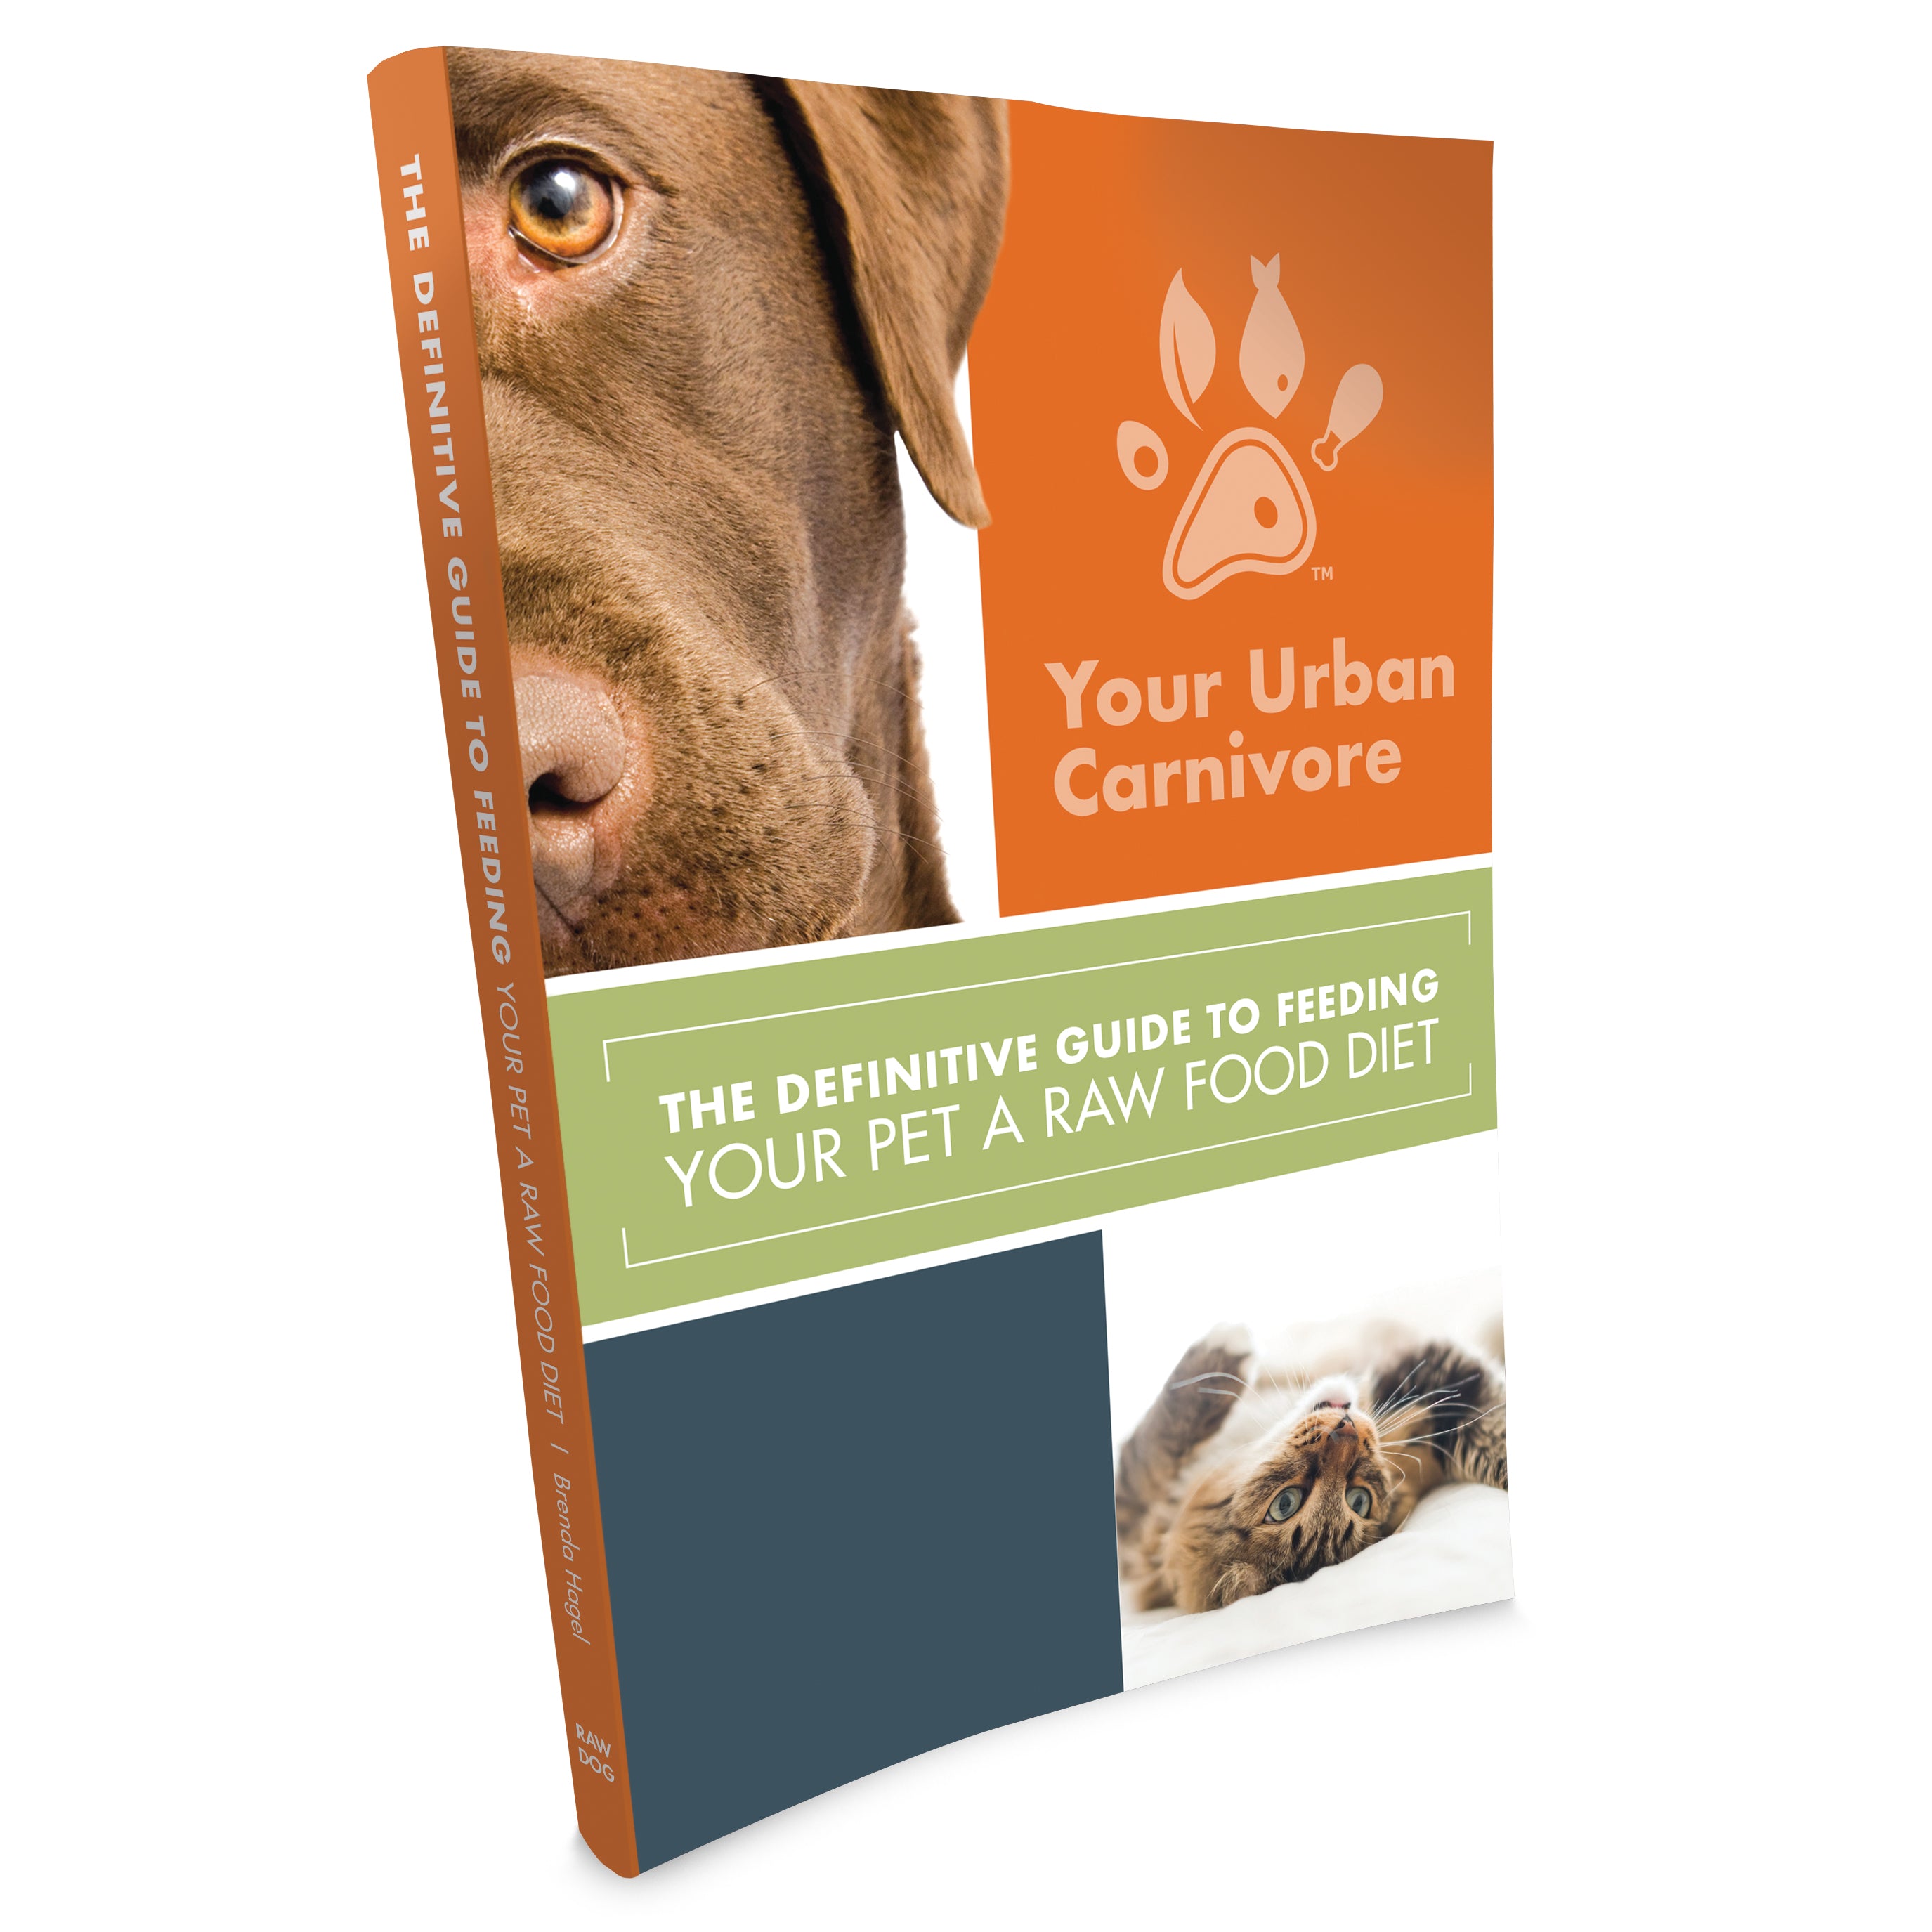 Your Urban Carnivore - The Definitive Guide to Feeding Your Pet a Raw Food Diet